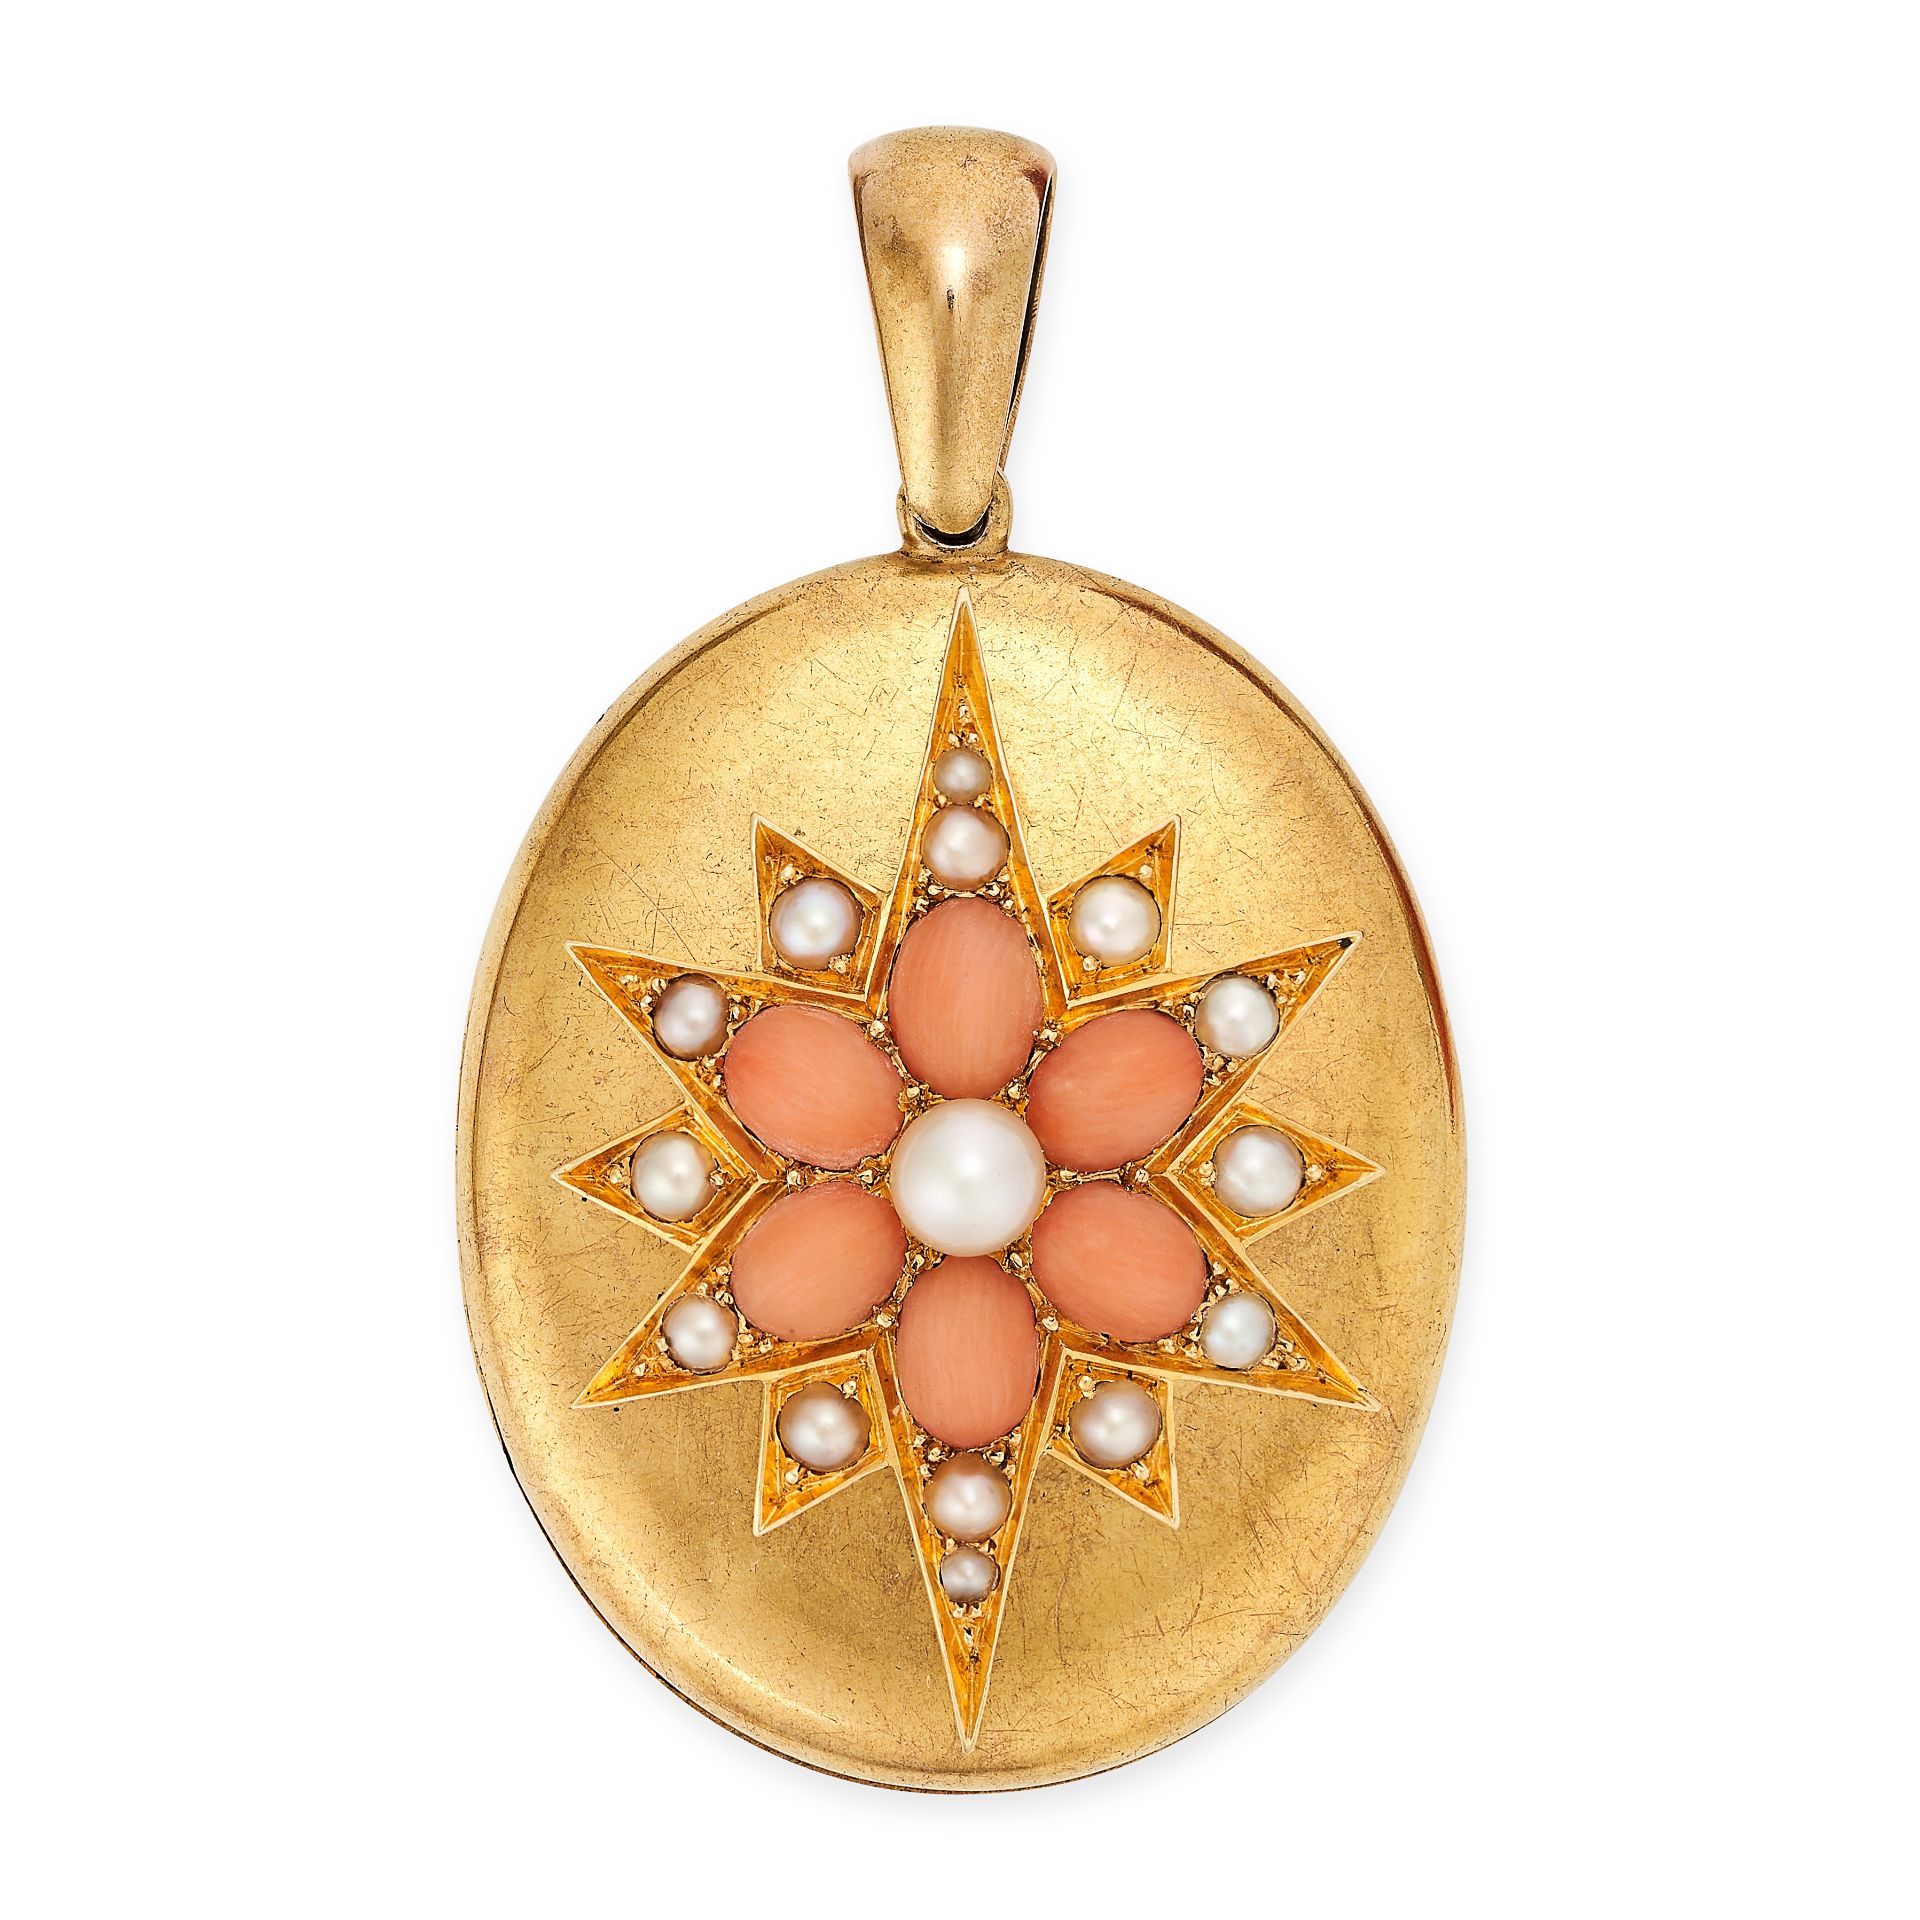 AN ANTIQUE CORAL AND PEARL MOURNING LOCKET in yellow gold, the oval hinged locket with an applied